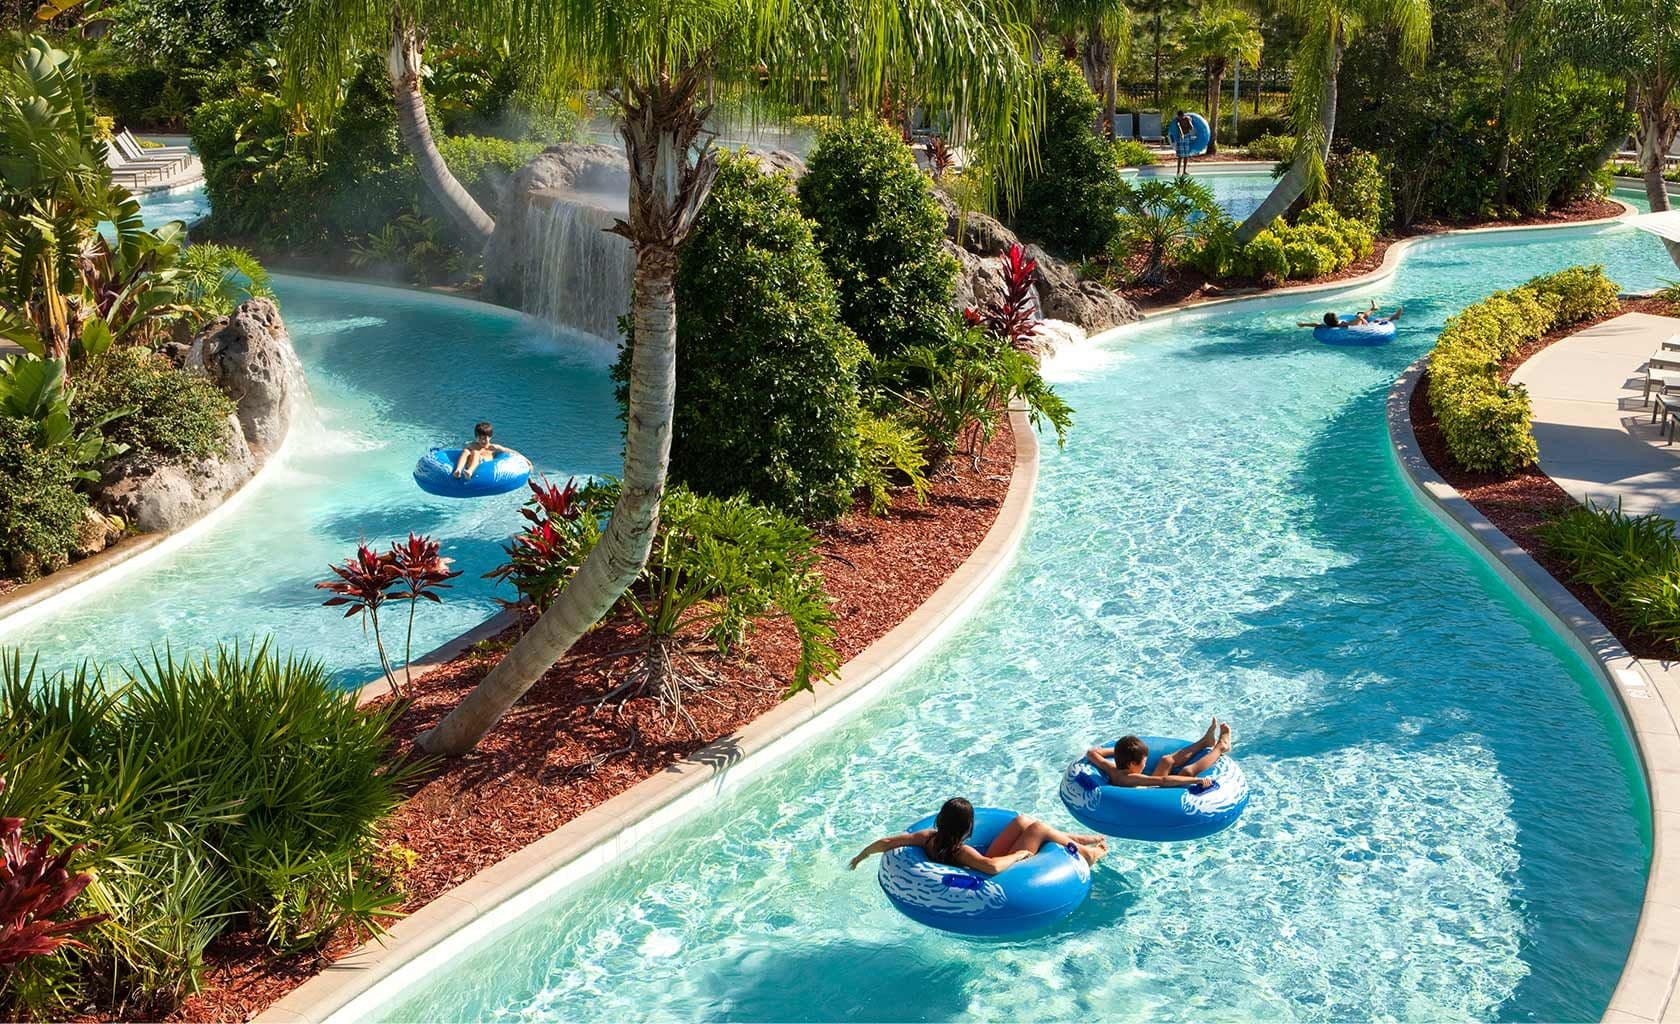 the Lazy River Carousel at the DoubleTree by Hilton Hotel Orlando at SeaWorld in Florida